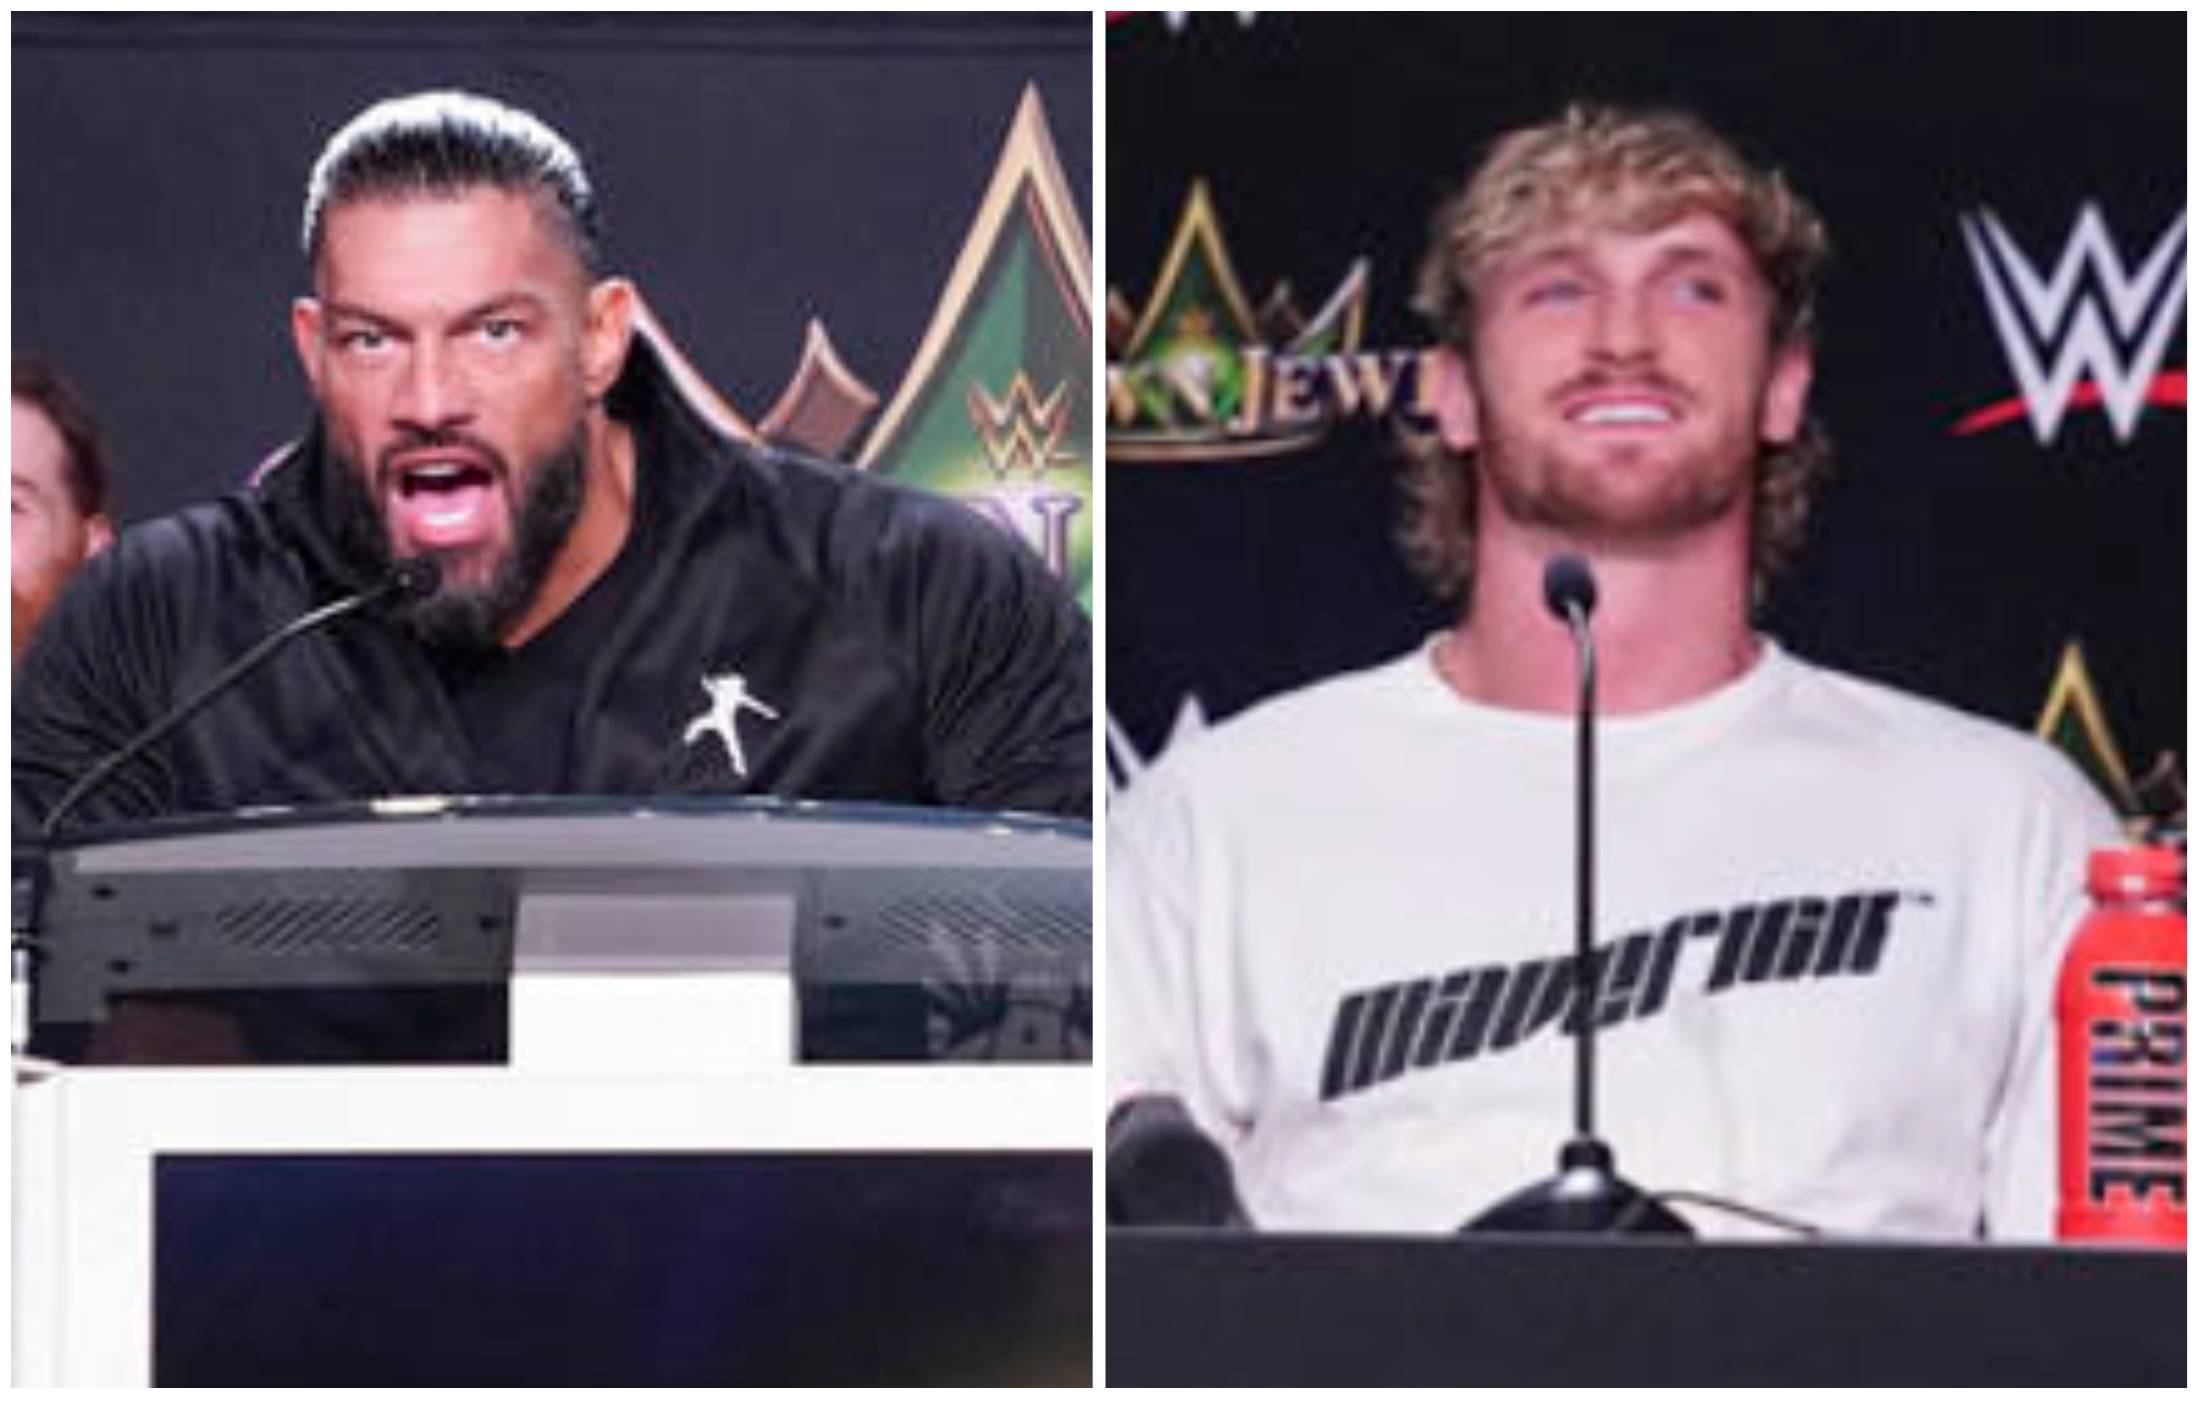 Roman Reigns ruined Logan Paul at WWE's press conference yesterday